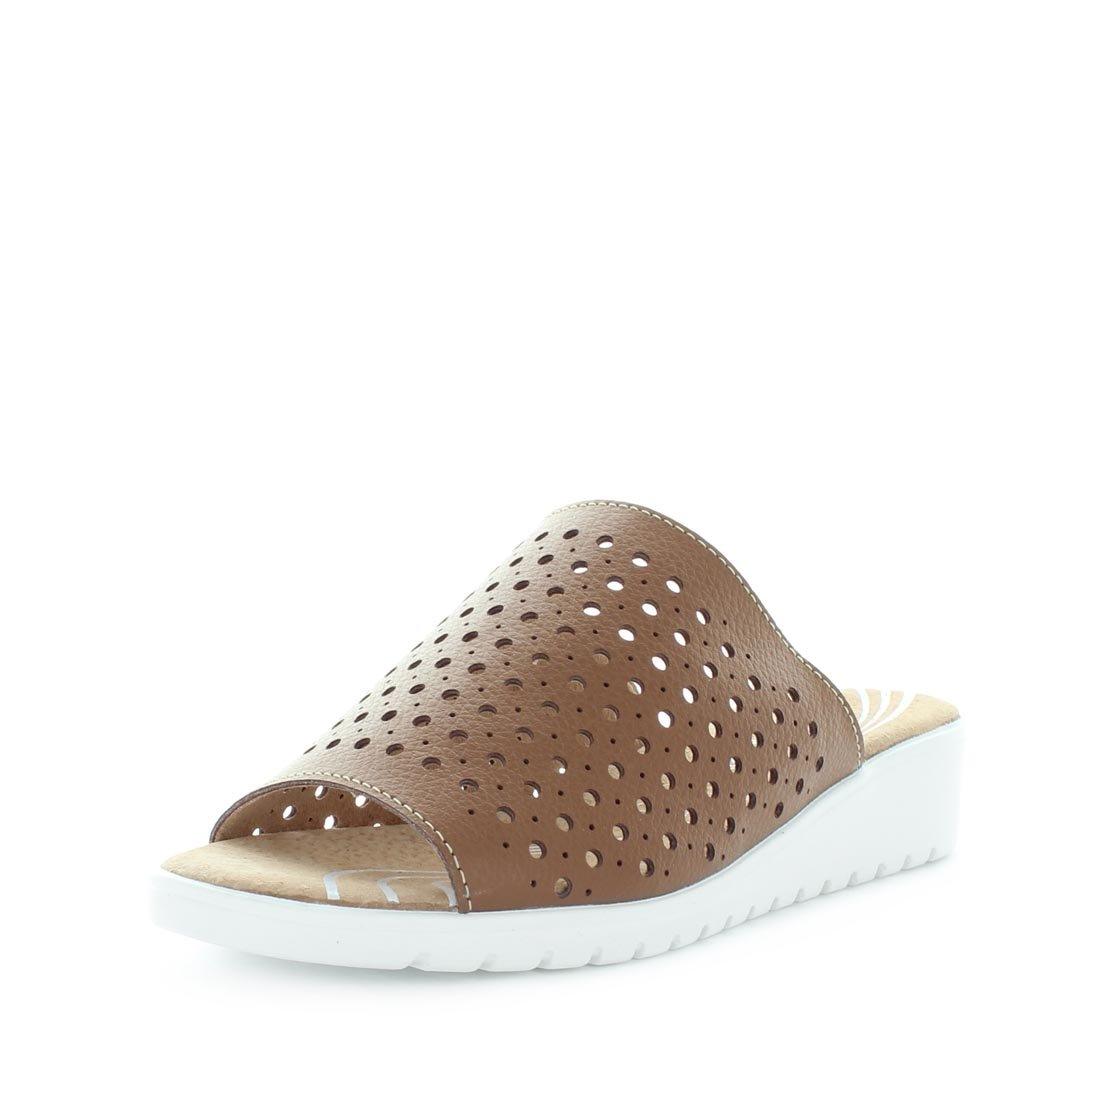 CORTIA by JUST BEE - iShoes - What's New: Women's New Arrivals, Women's Shoes, Women's Shoes: Sandals, Women's Shoes: Wedges - FOOTWEAR-FOOTWEAR